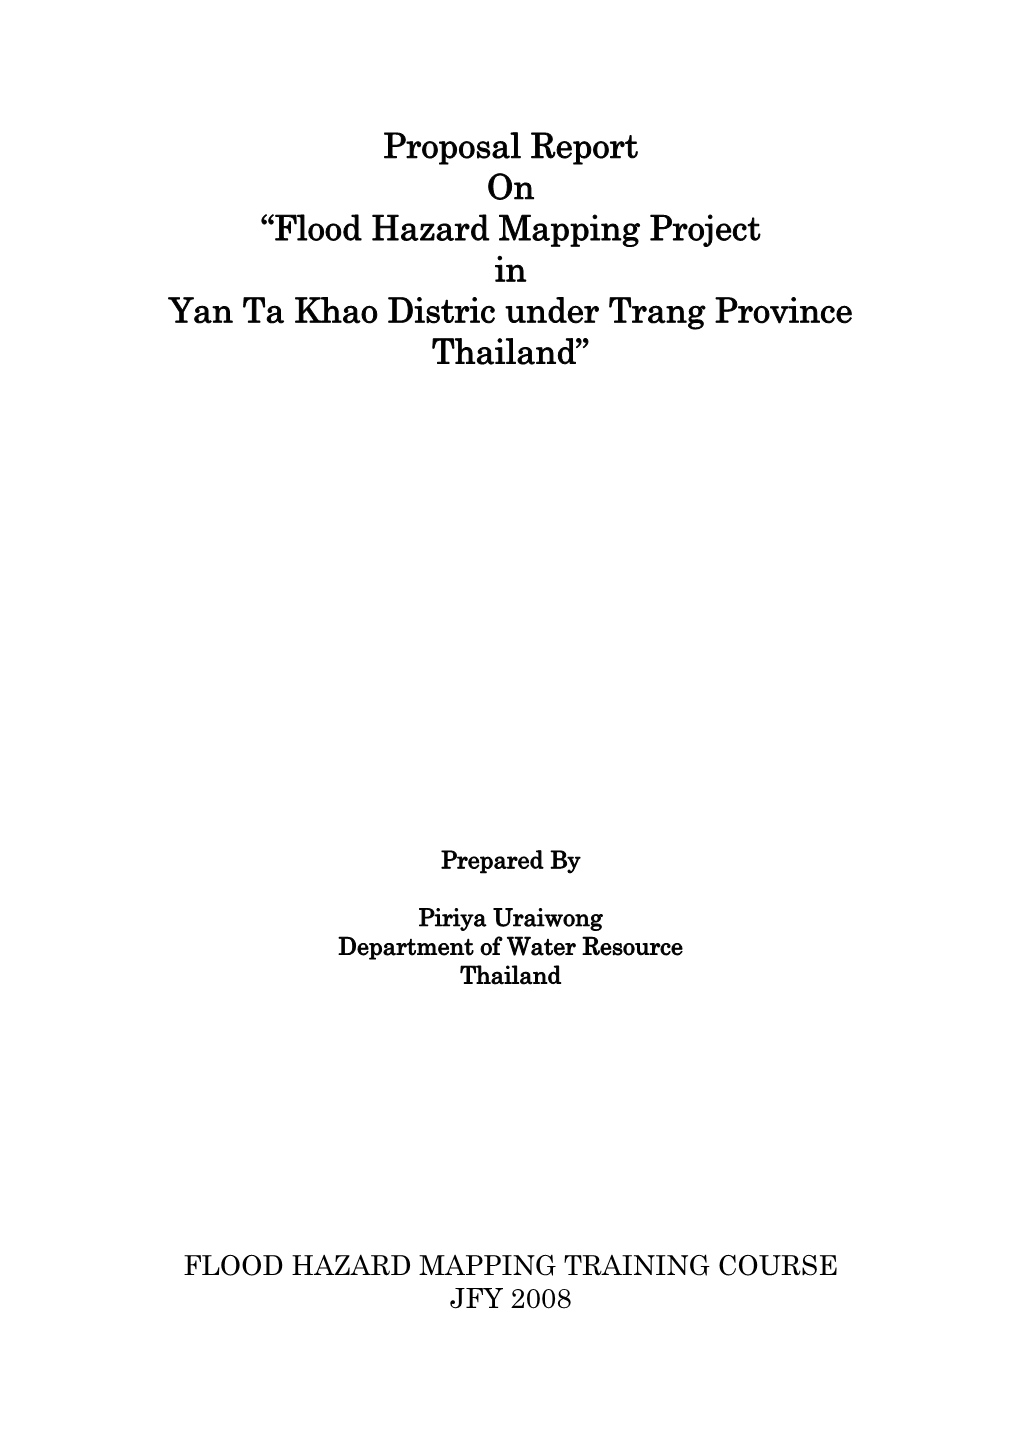 Proposal Report on “Flood Hazard Mapping Project in Yan Ta Khao Distric Under Trang Province Thailand”